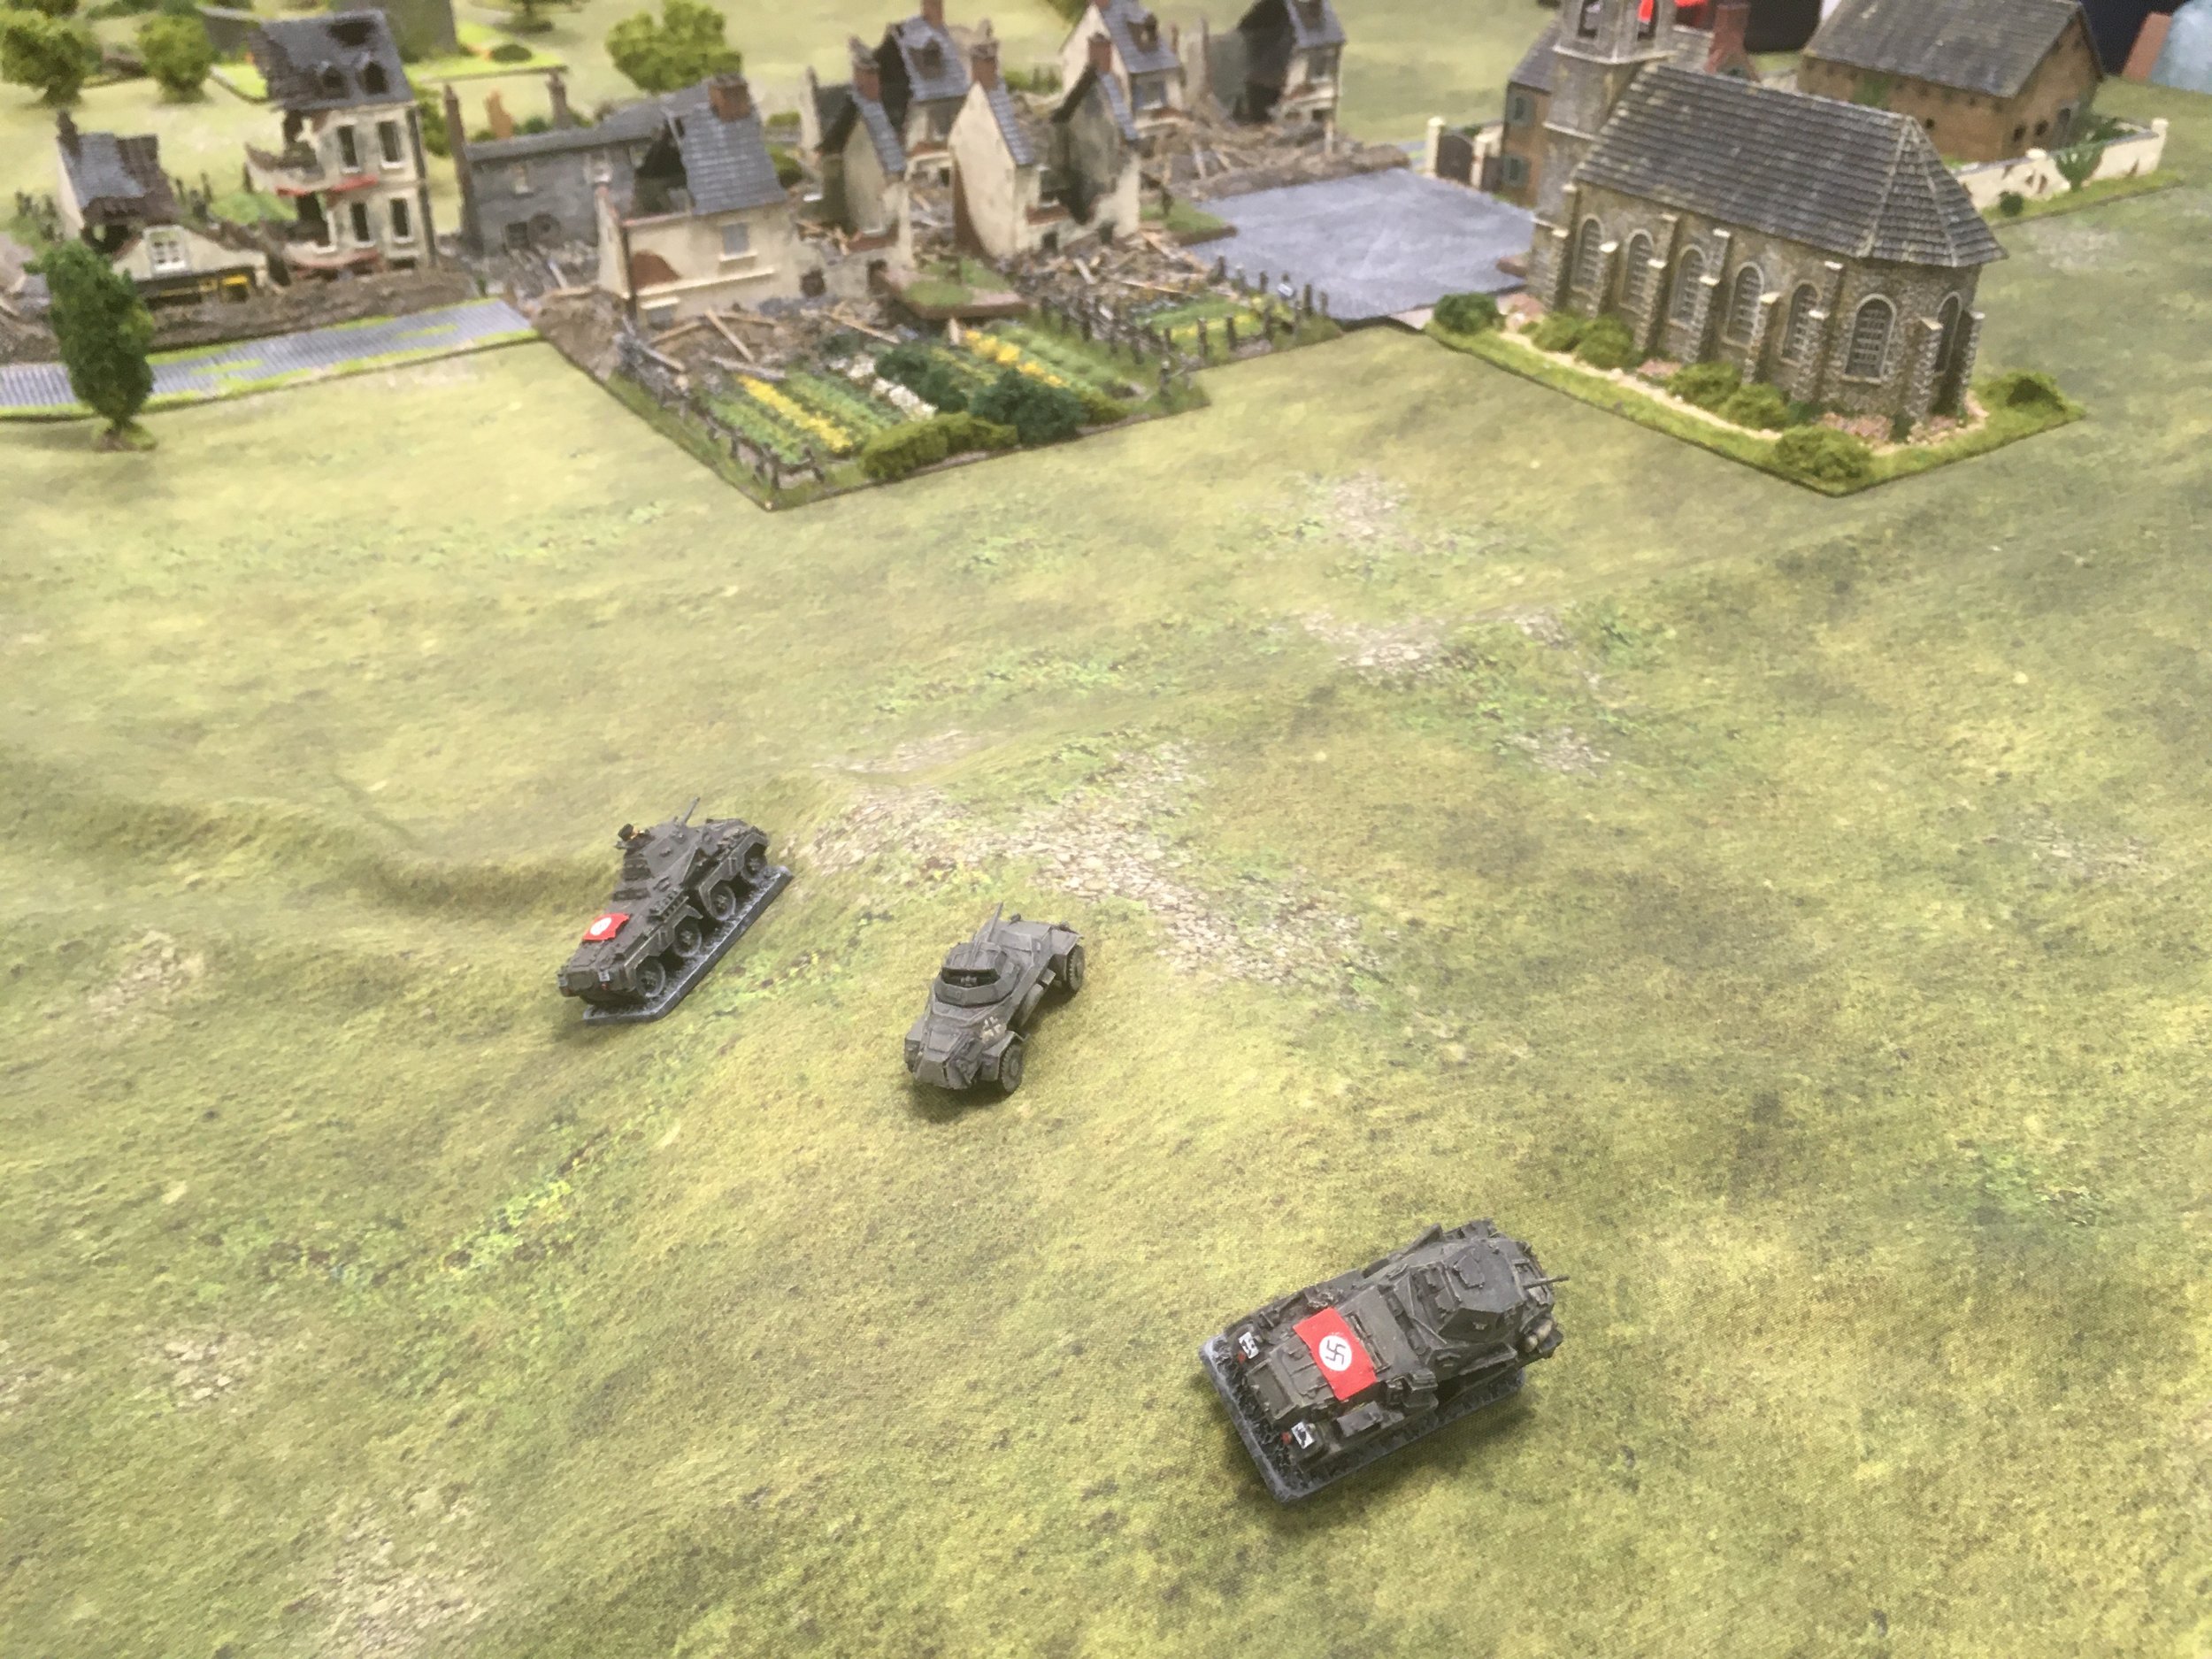 Whilst the armoured cars approach from the German right flank...